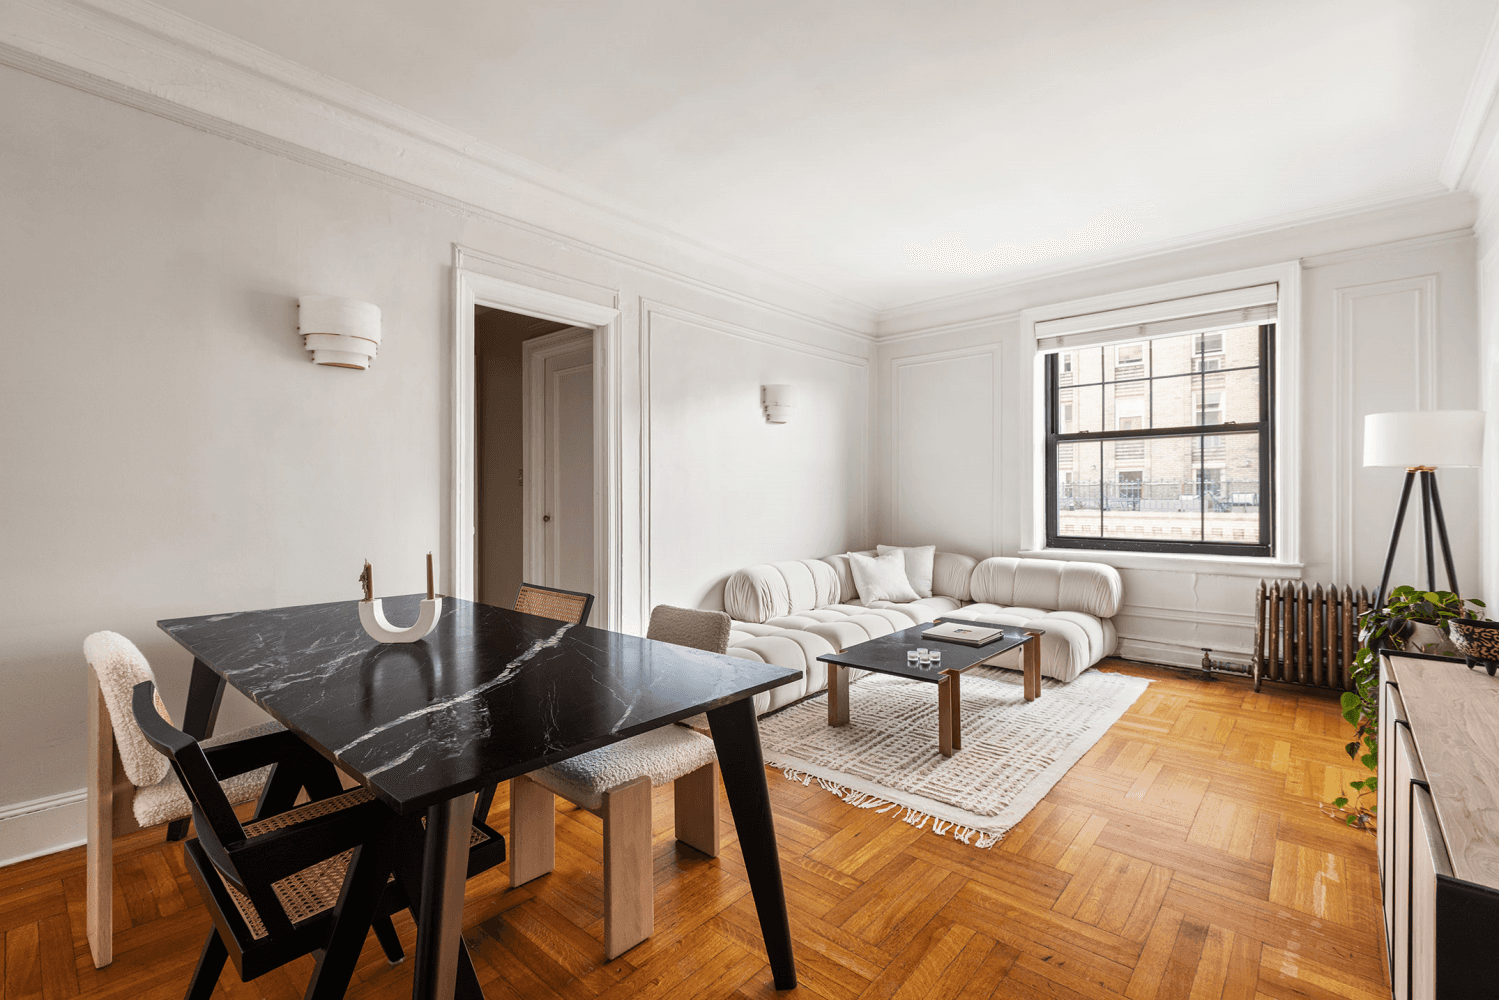 Welcome to 35 Clark Street Apartment F3 ; a beautiful, oversized one bedroom in the heart of prime Brooklyn Heights.